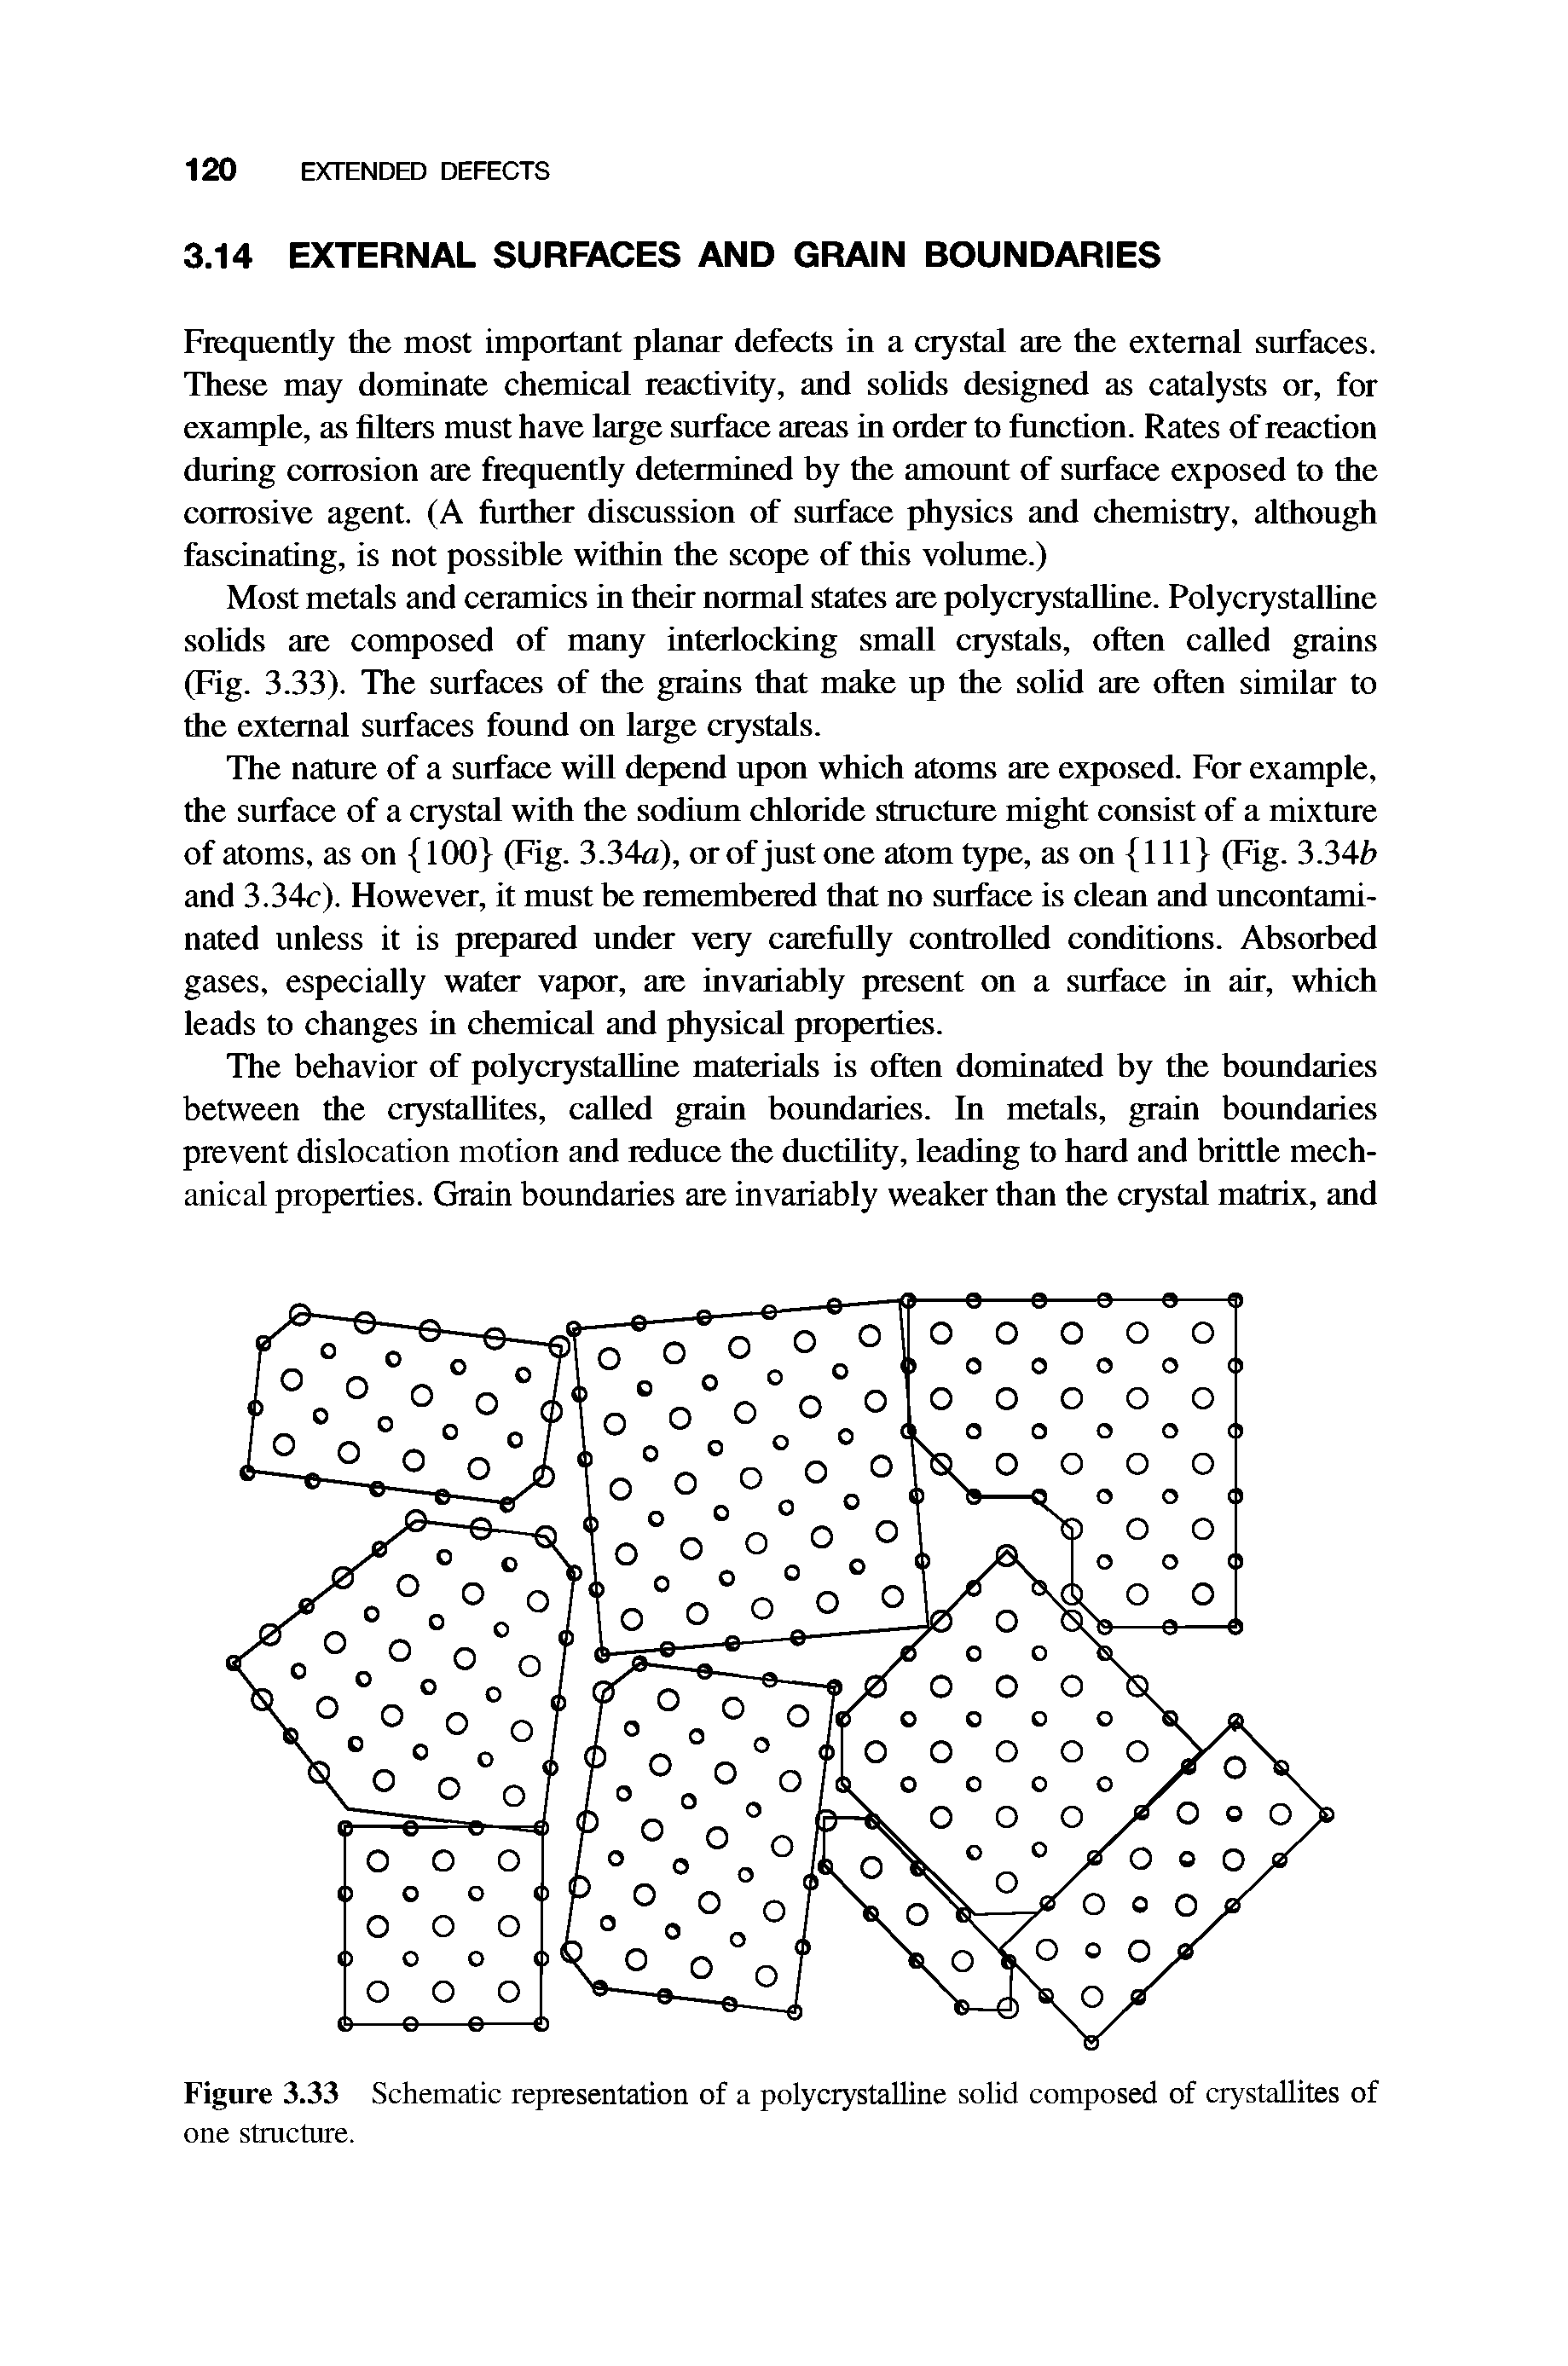 Figure 3.33 Schematic representation of a polycrystalline solid composed of crystallites of one structure.